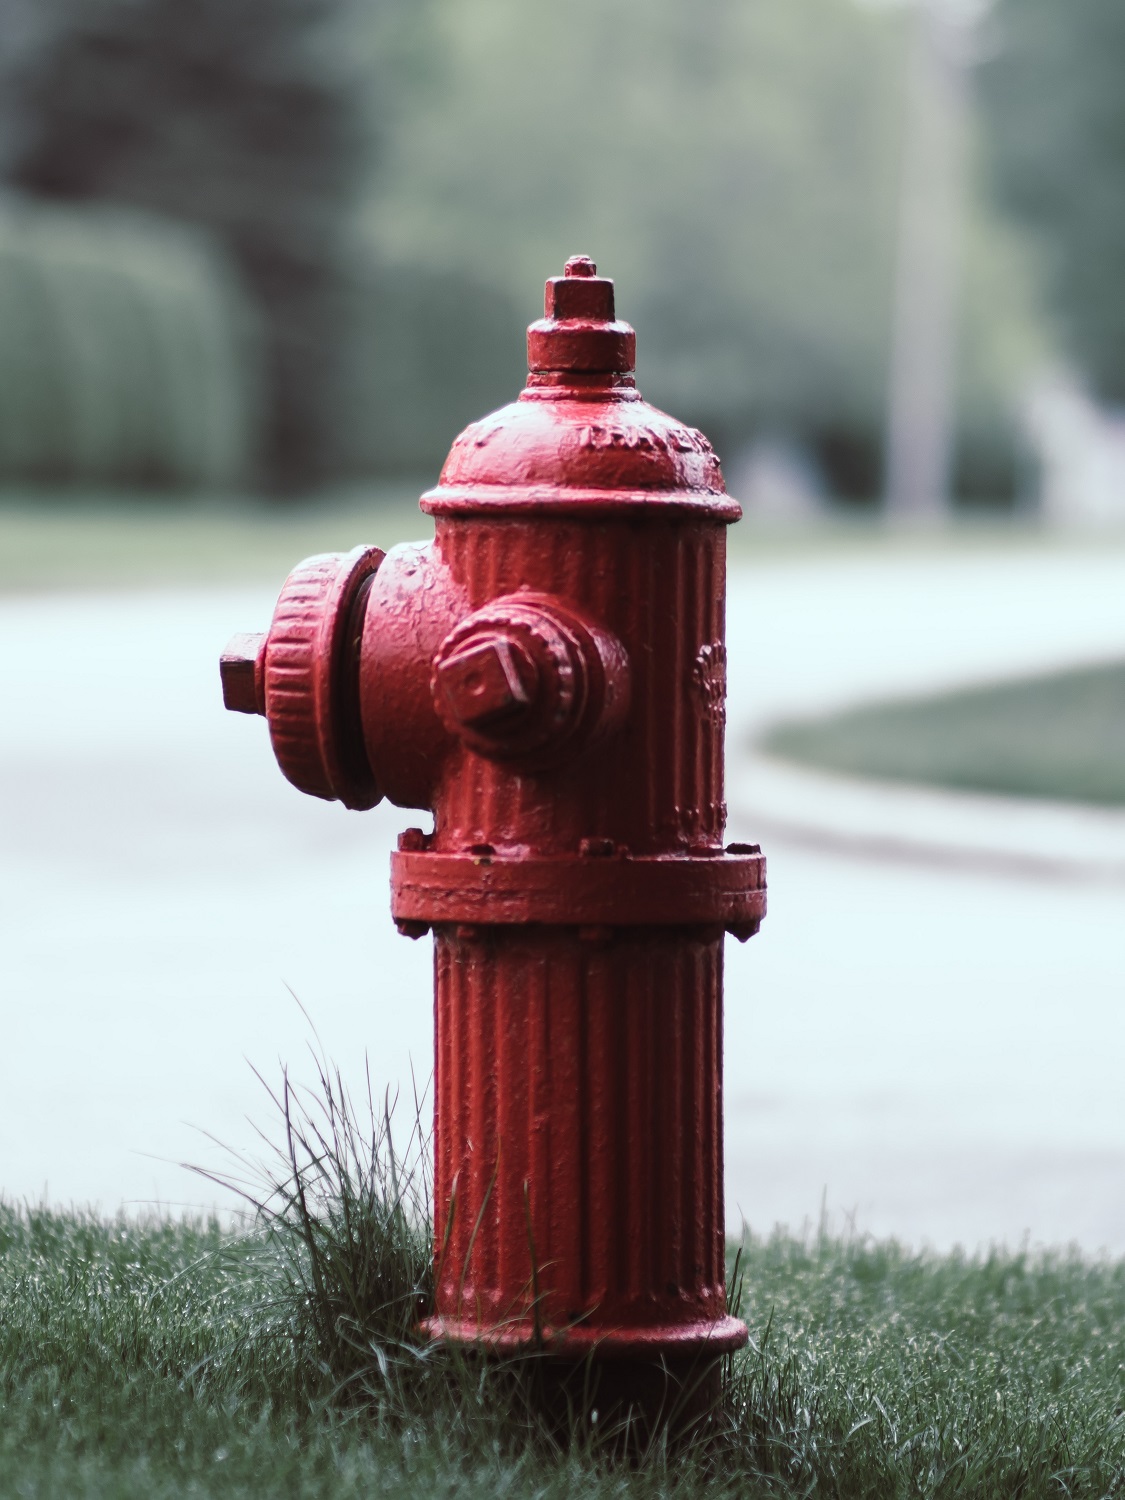 City of Escondido - Painting Fire Hydrants